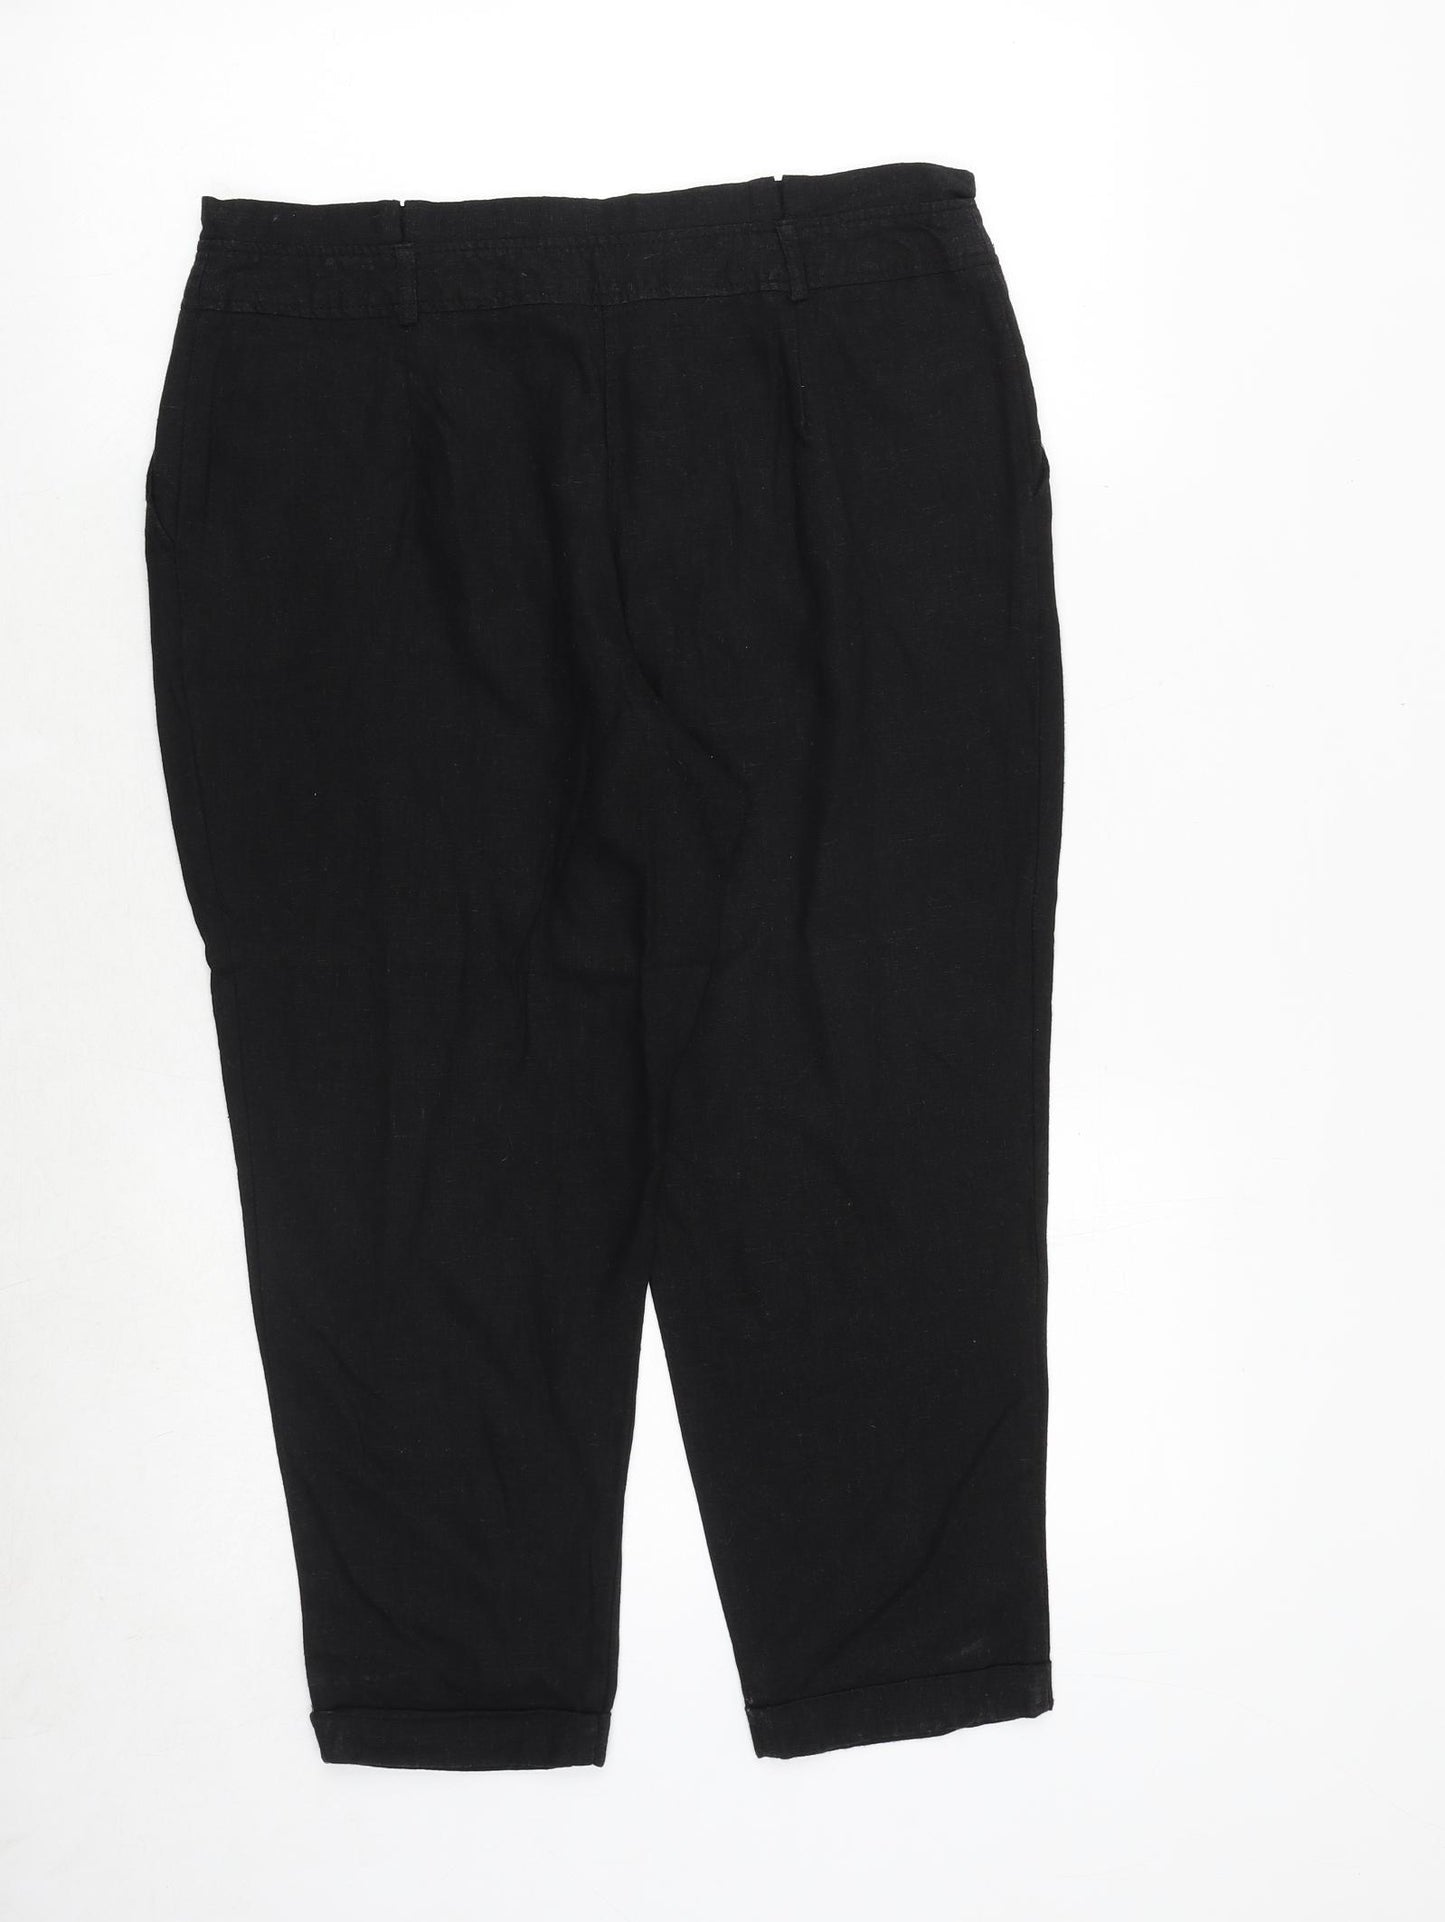 Dorothy Perkins Womens Black Polyester Trousers Size 14 Regular Zip